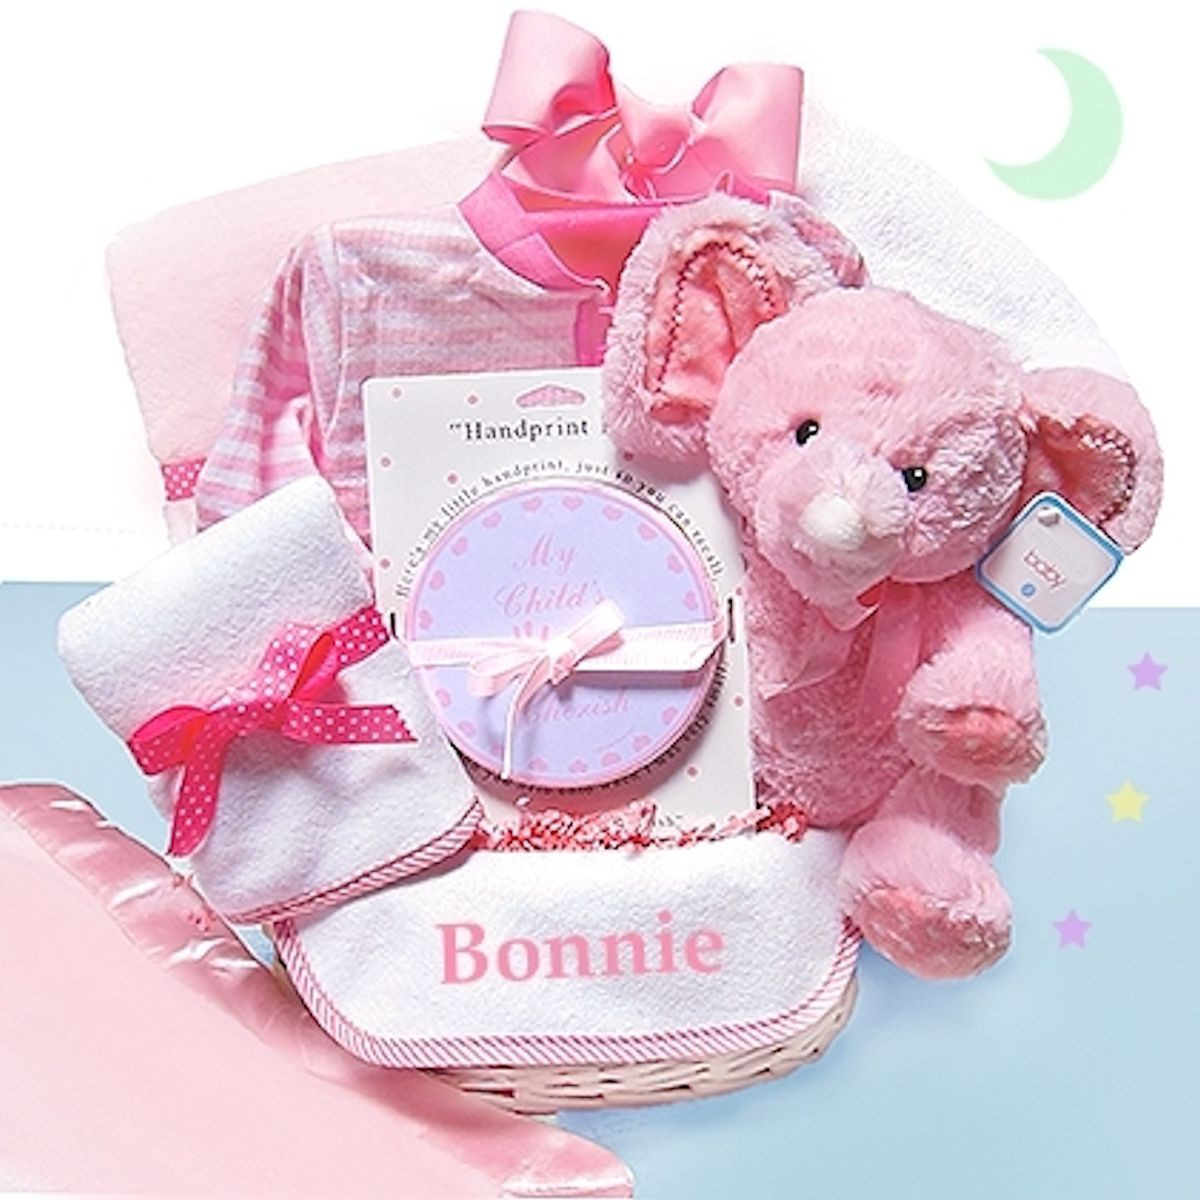 21 Best Personalized Baby Gifts for Girls Home, Family, Style and Art